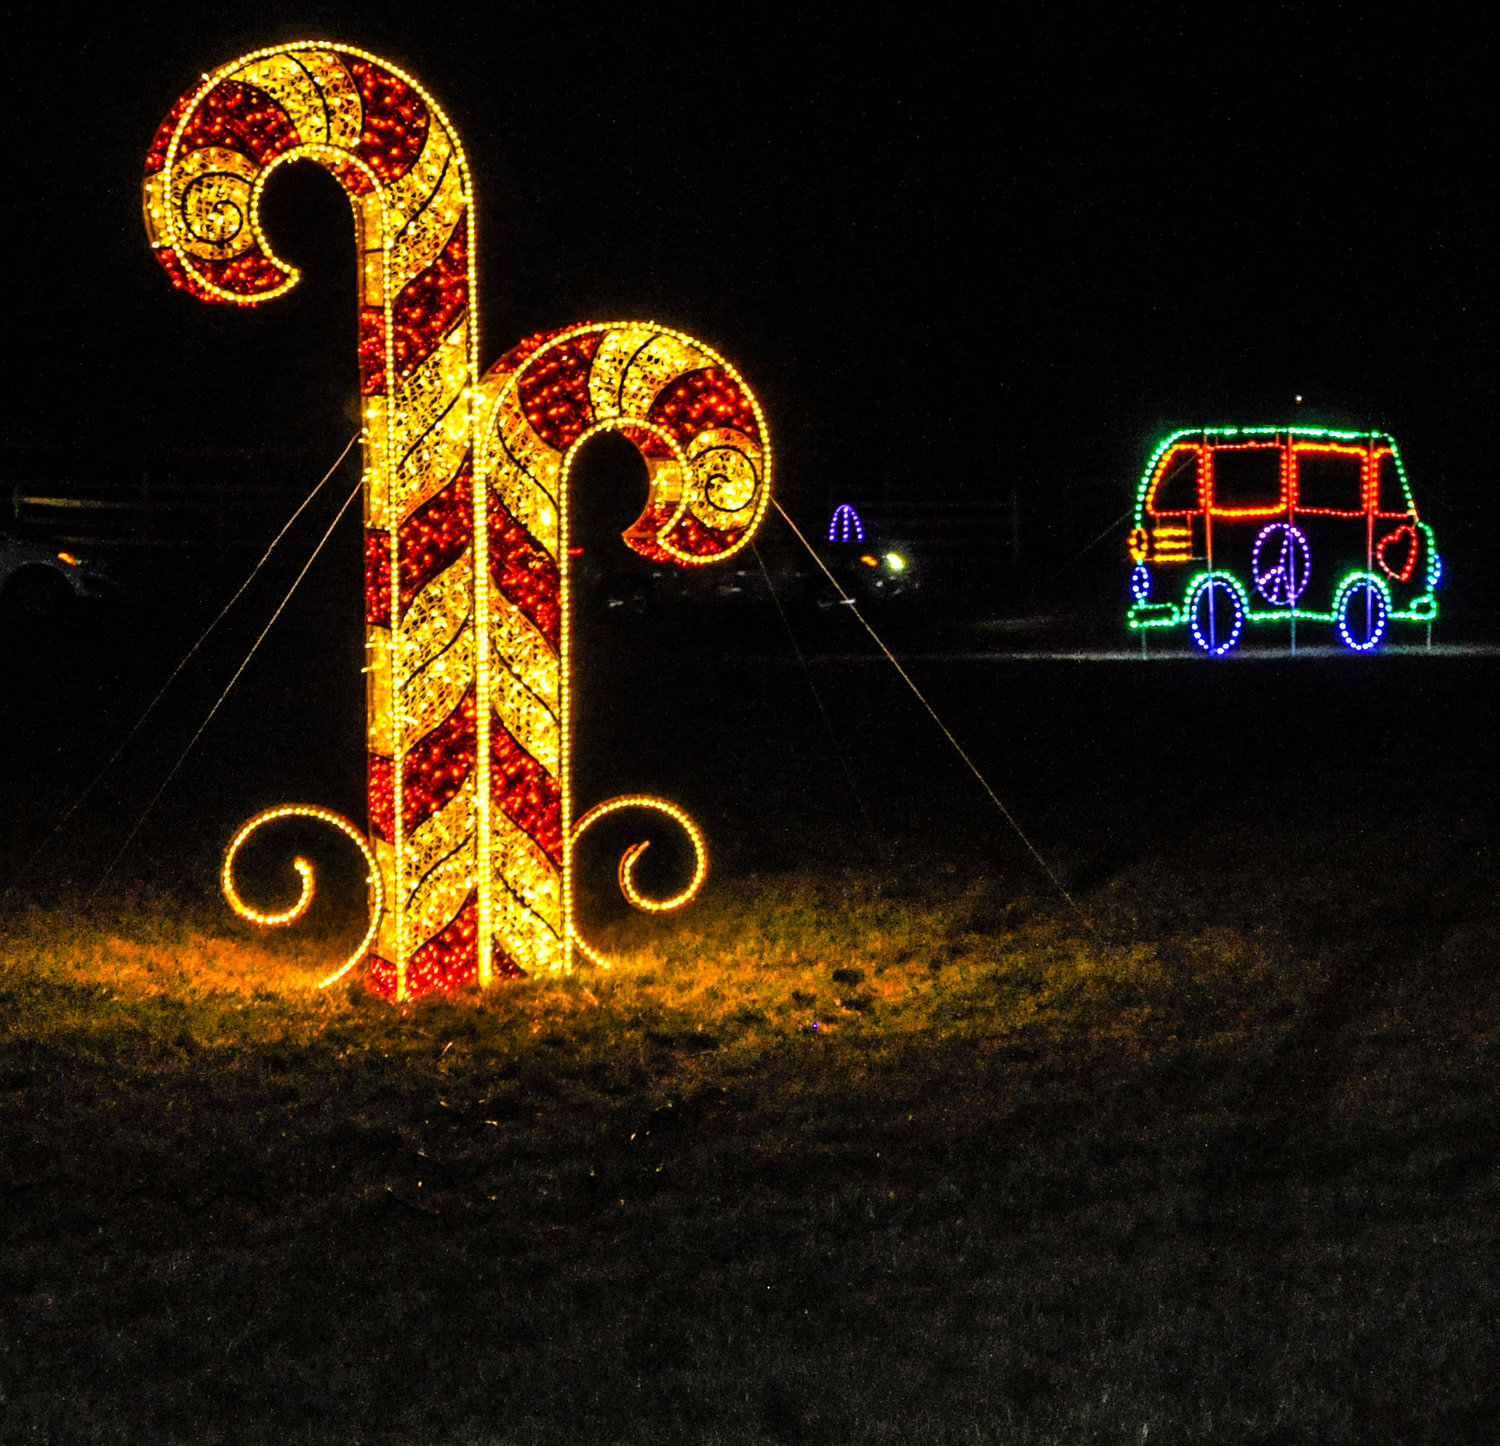 The lights were glorious in 2021 at "Peace, Love & Lights." Don't miss them this year.